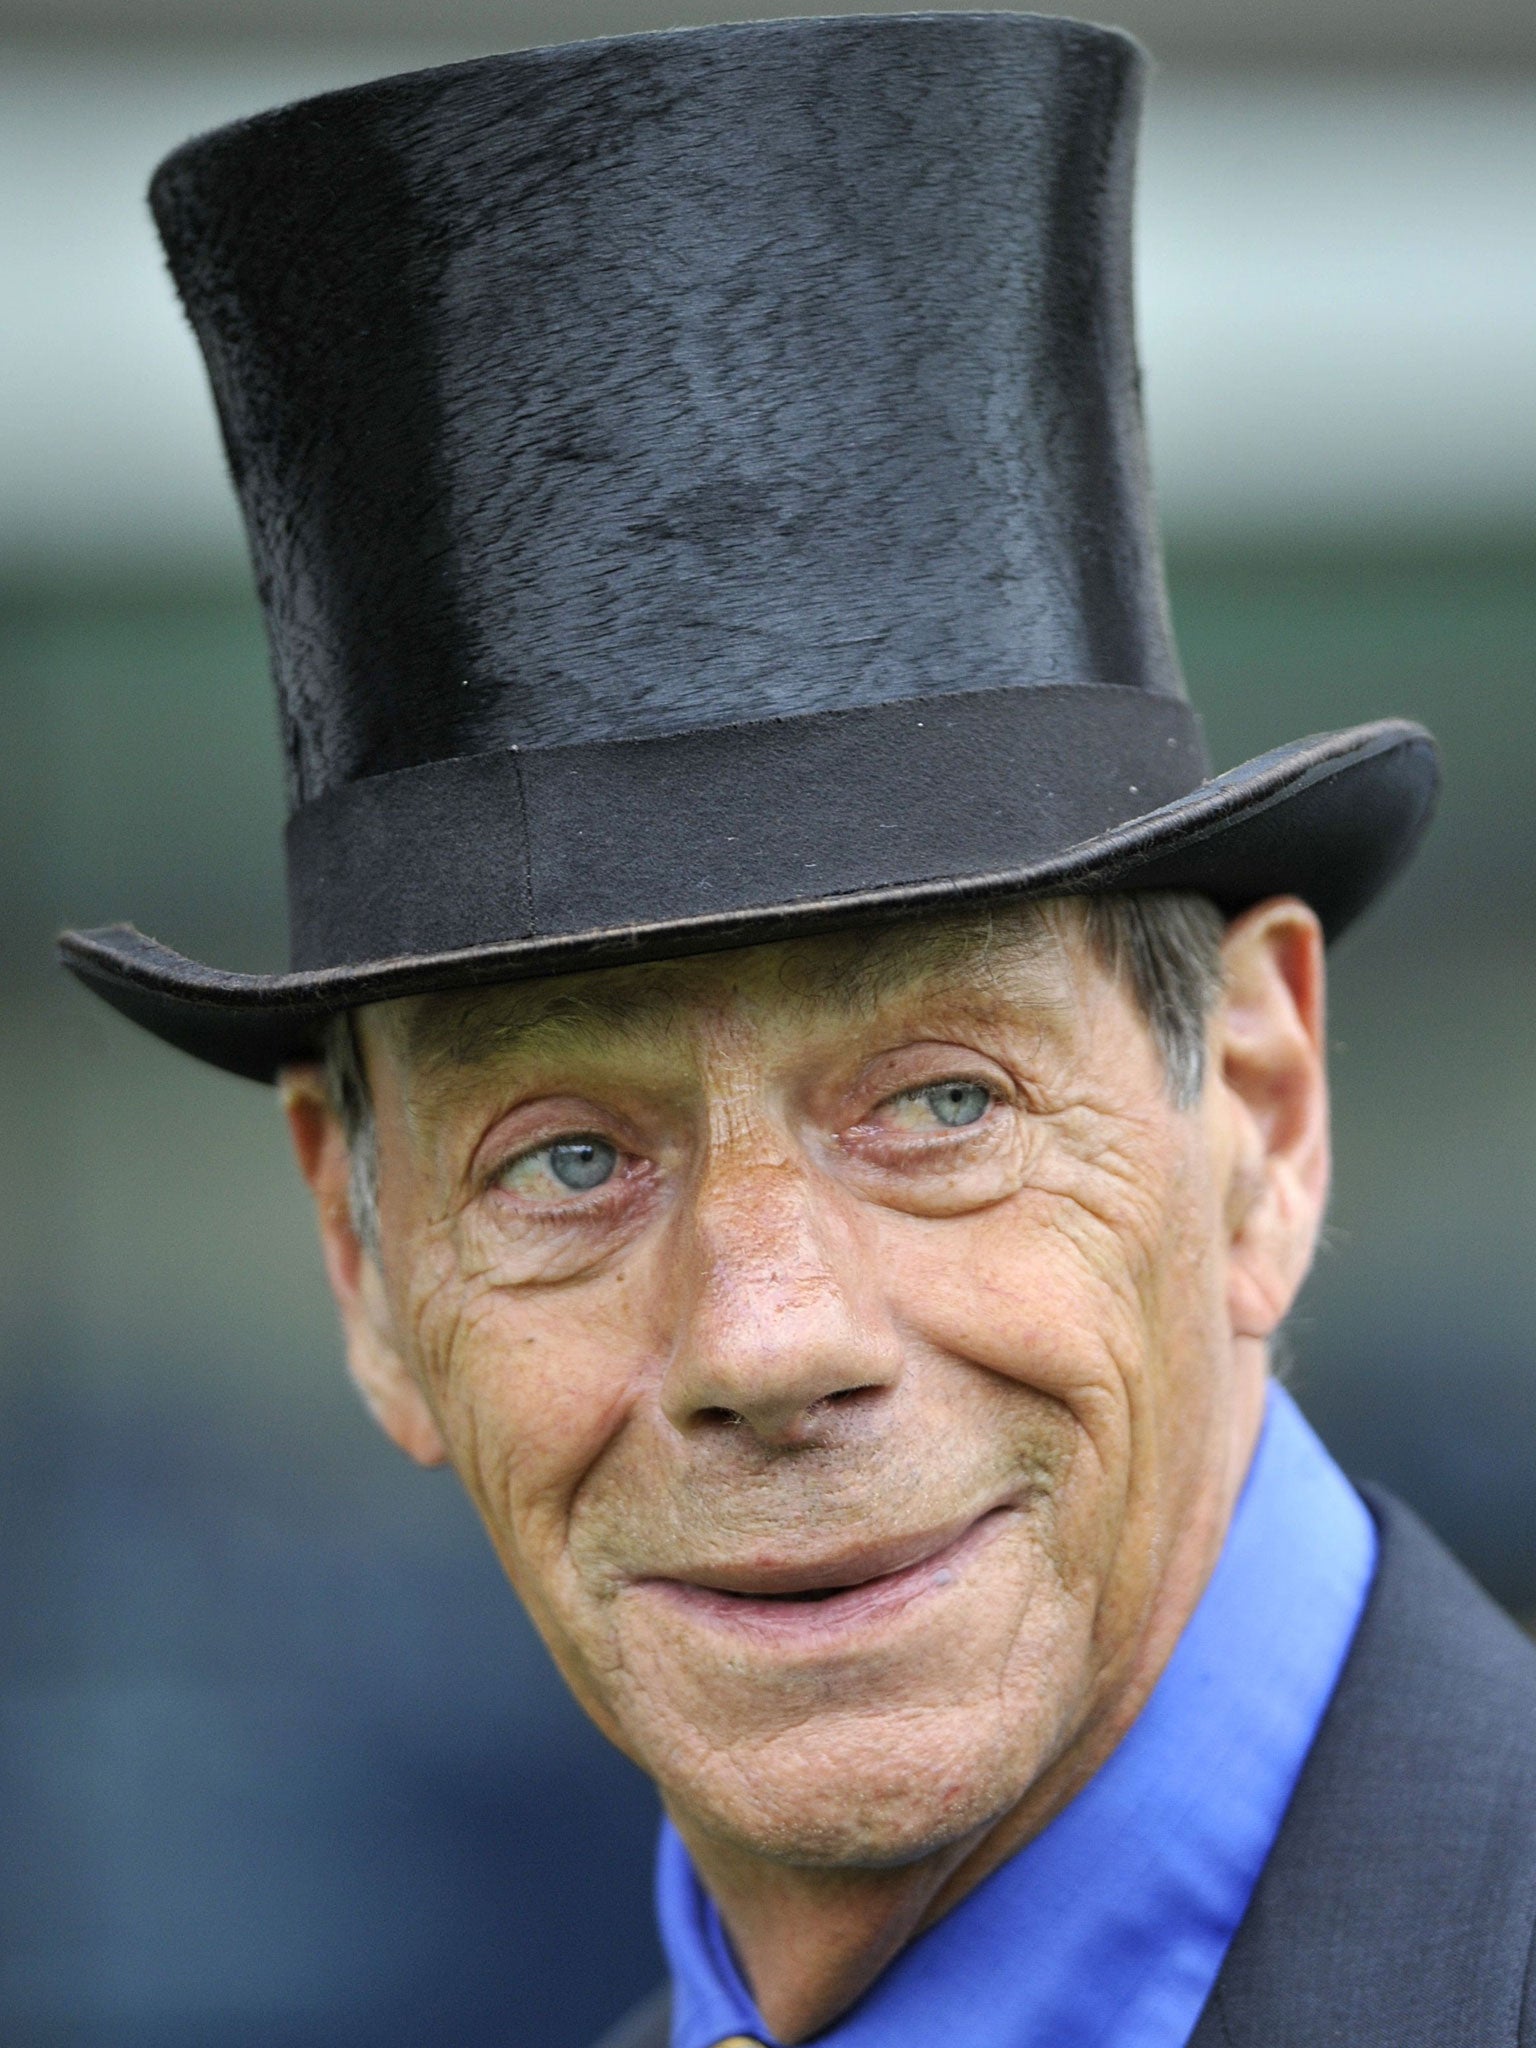 Sir Henry Cecil's Royal Ascot entries will run as planned